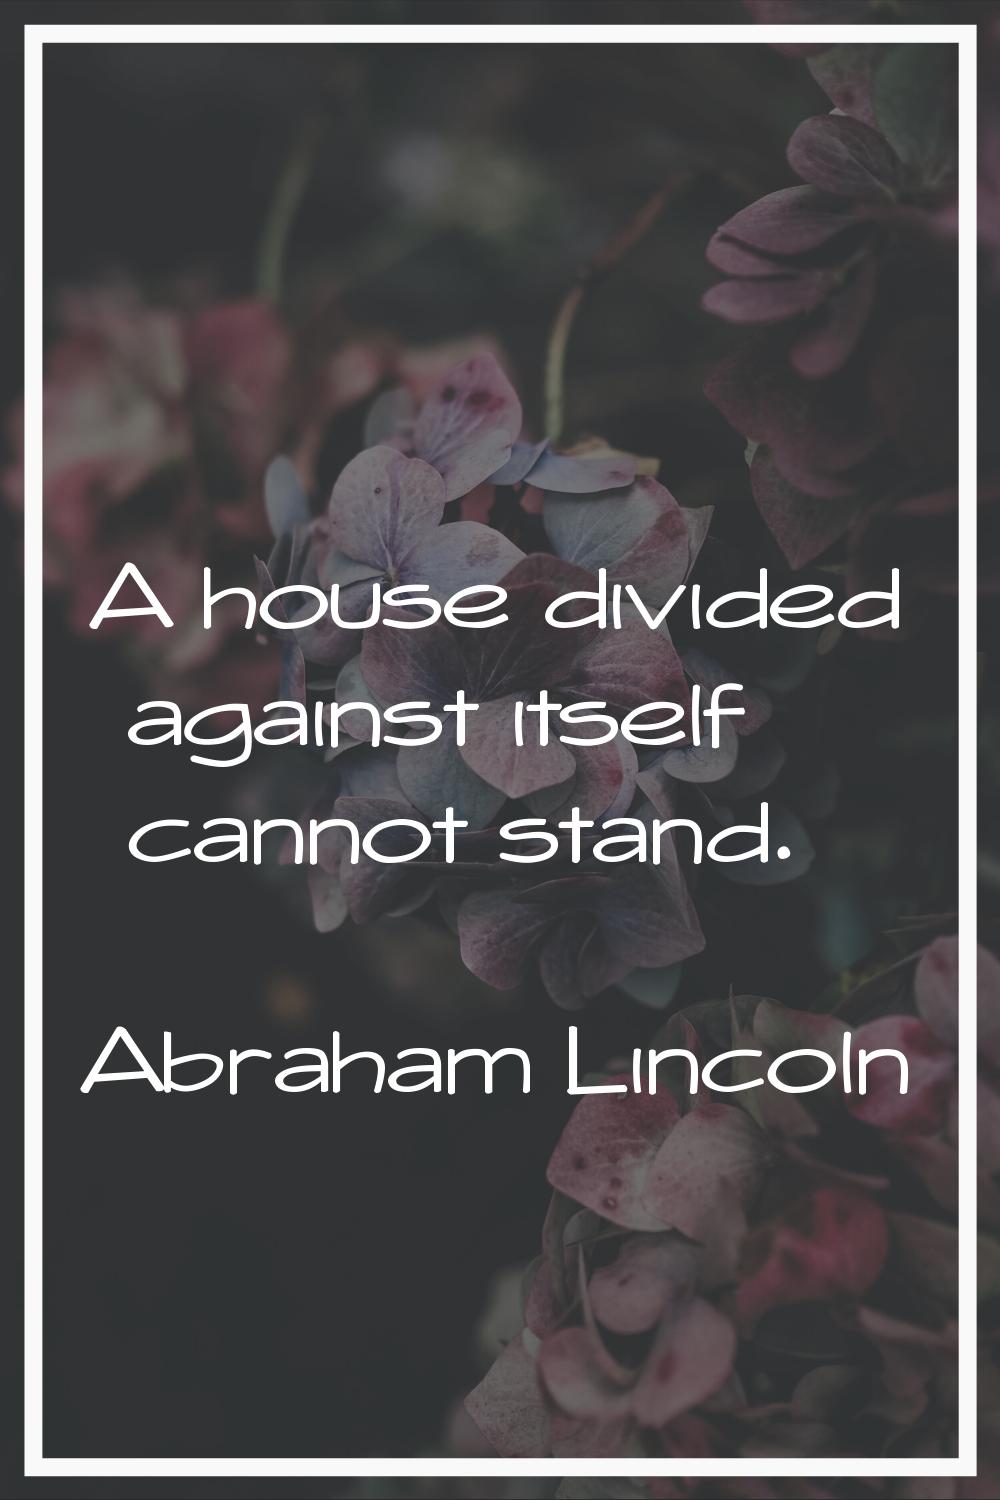 A house divided against itself cannot stand.